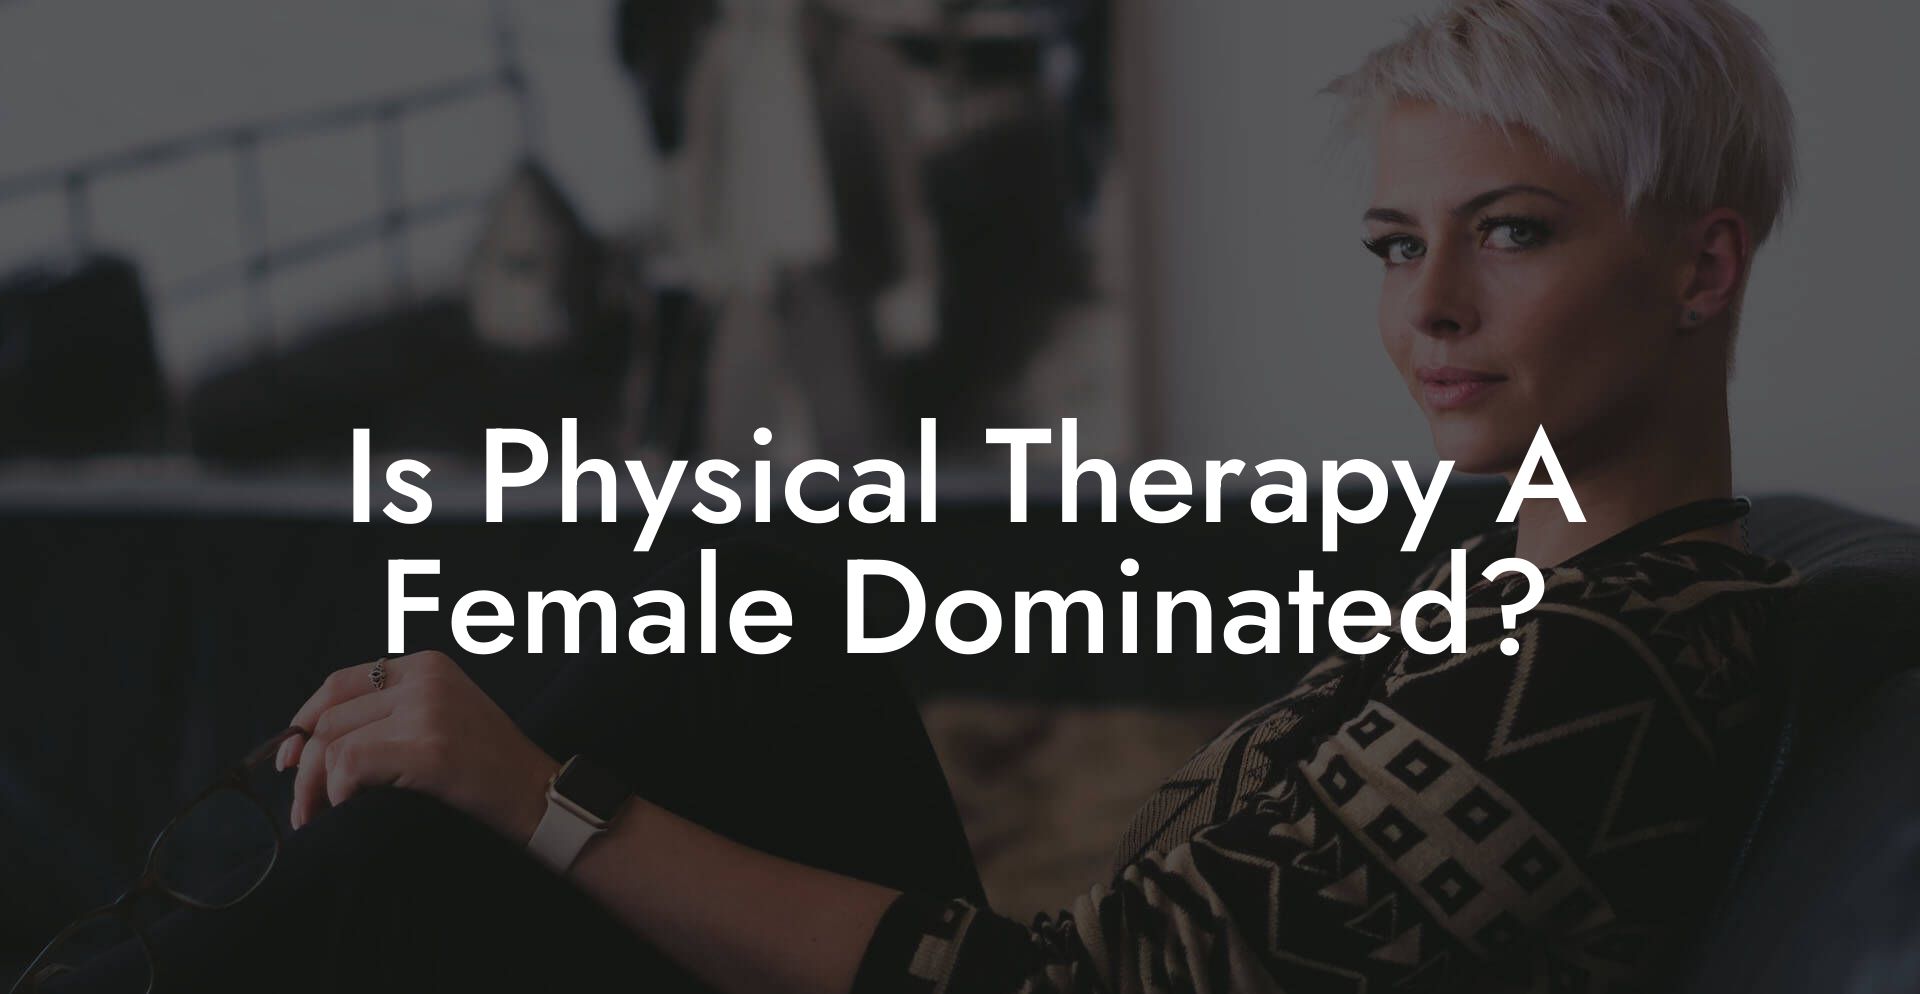 Is Physical Therapy A Female Dominated?